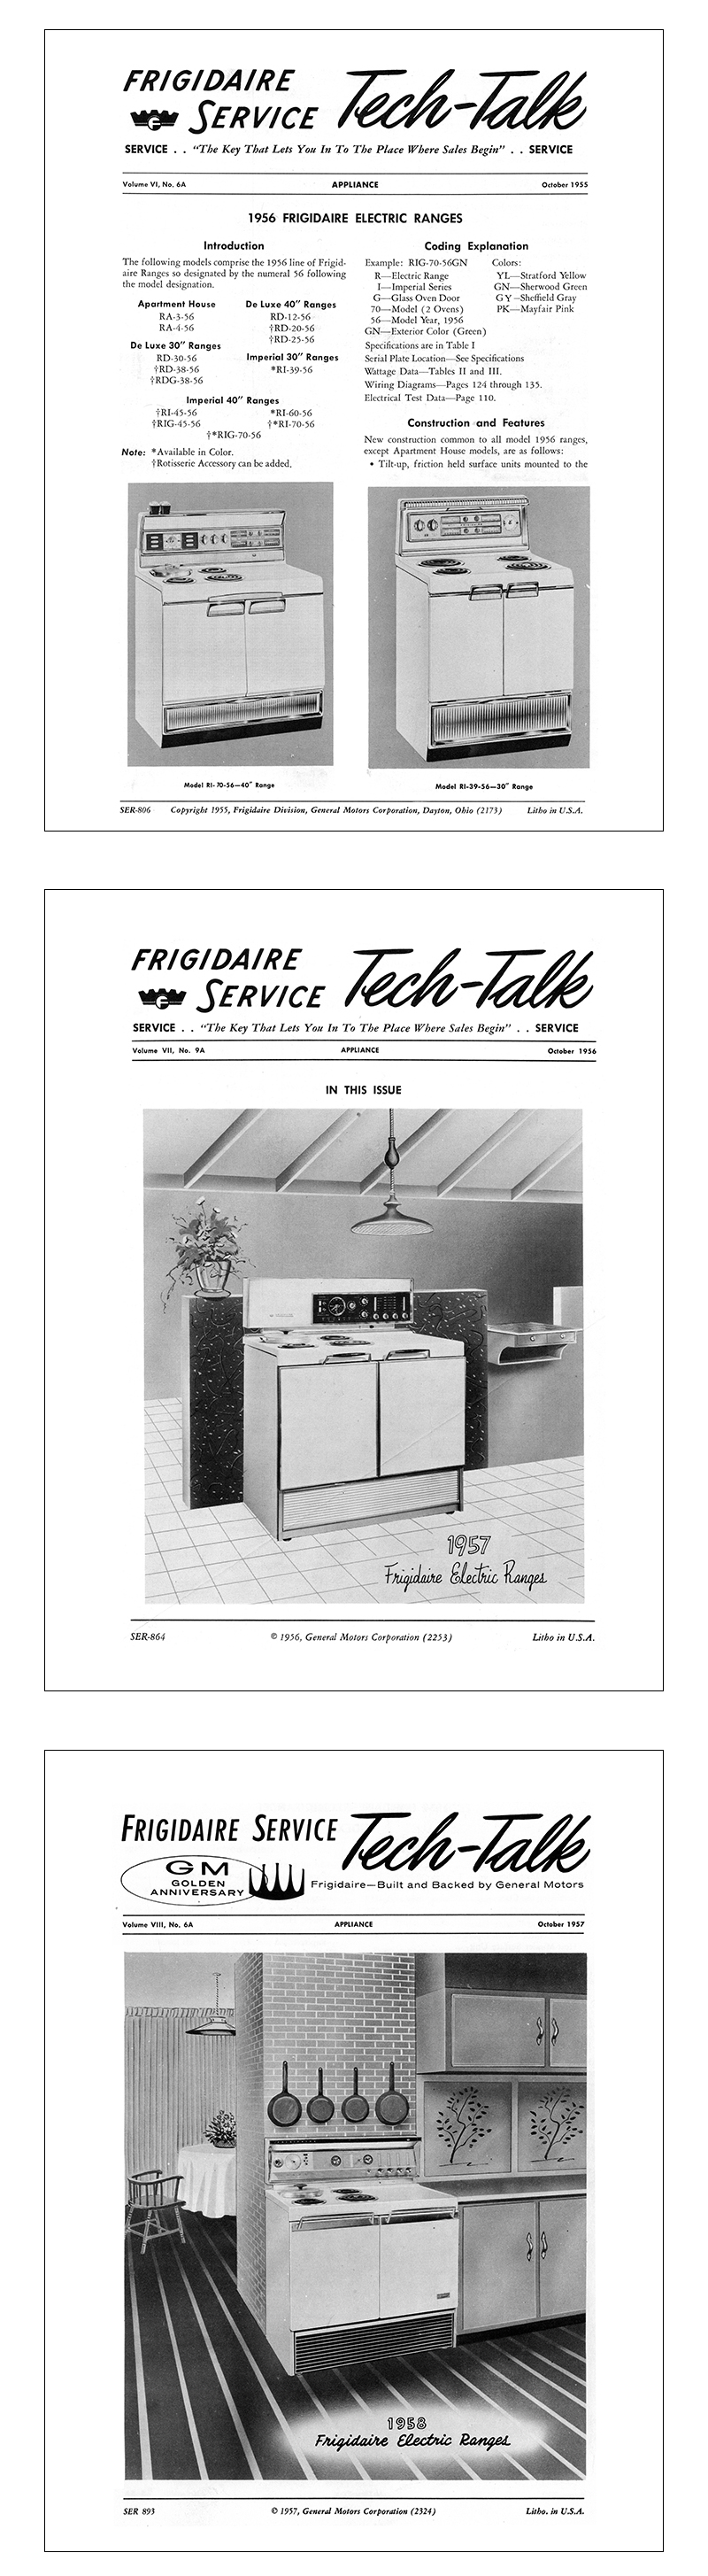 Kitchen Range Library-1956 Frigidaire Electric Range Tech-Talk Service and  Parts Manual